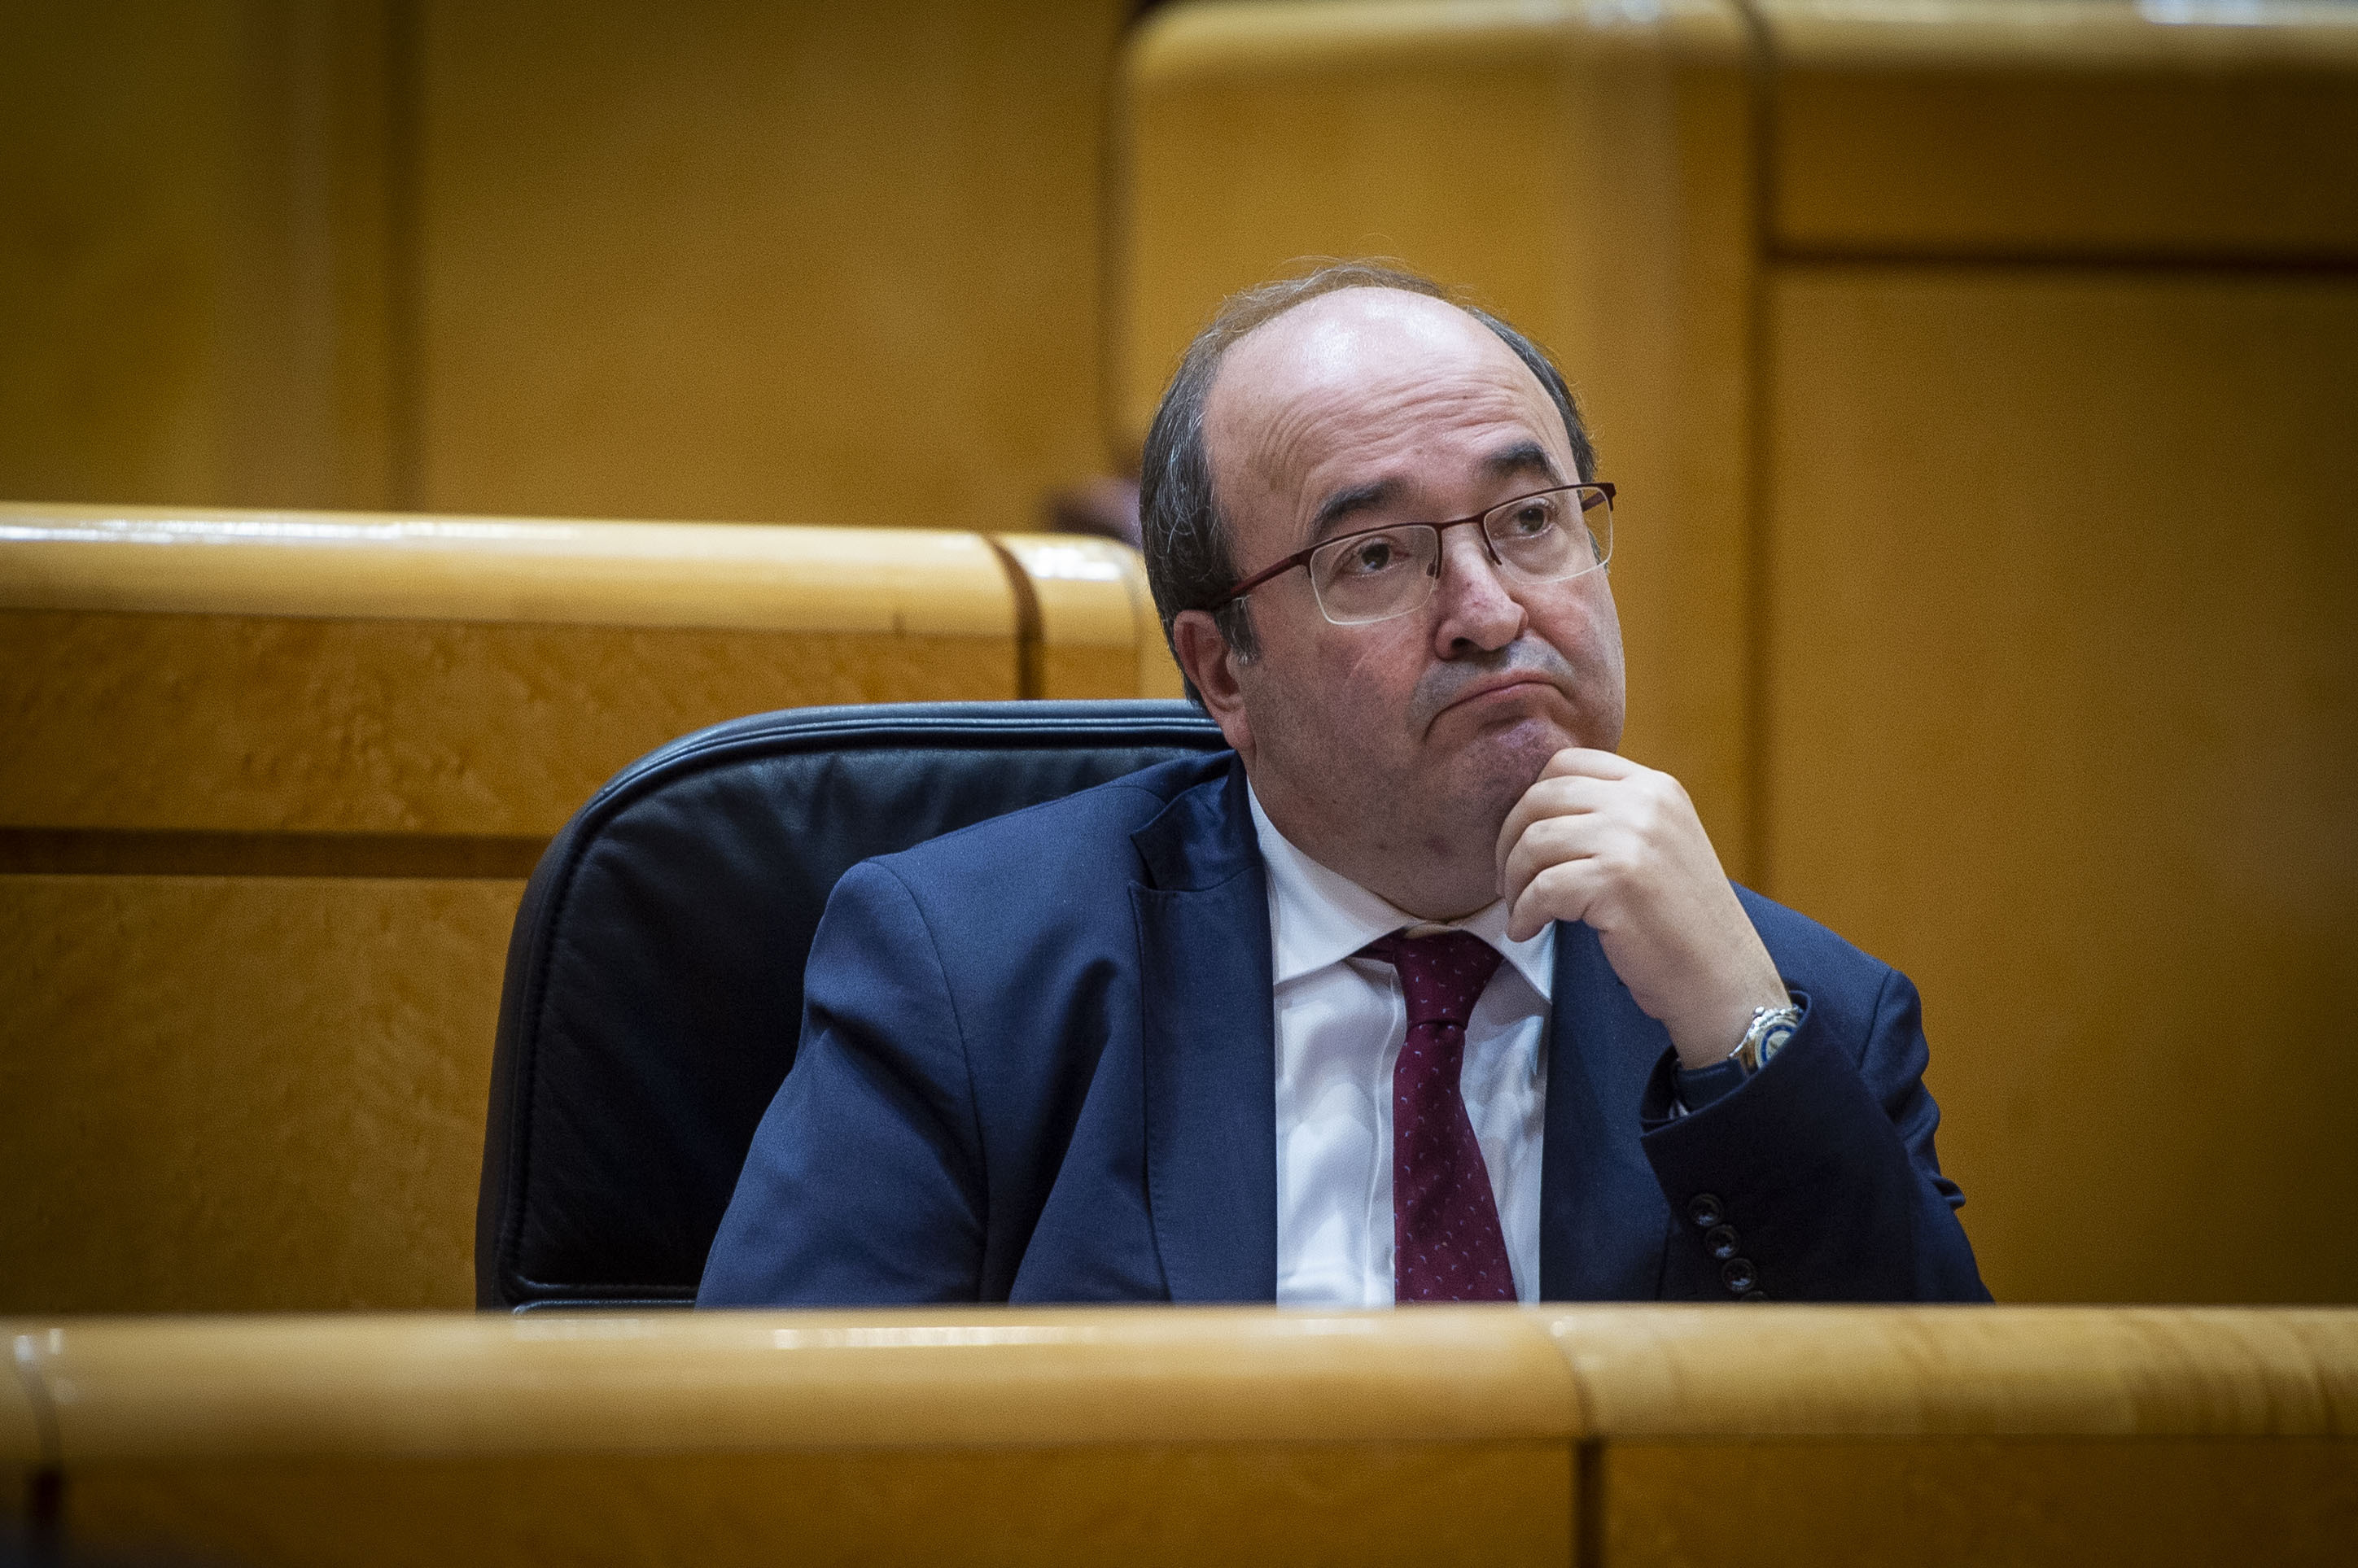 The Minister of Culture and Sports, Miquel Iceta, during a plenary session of the Senate, on December 13, 2022, in Madrid